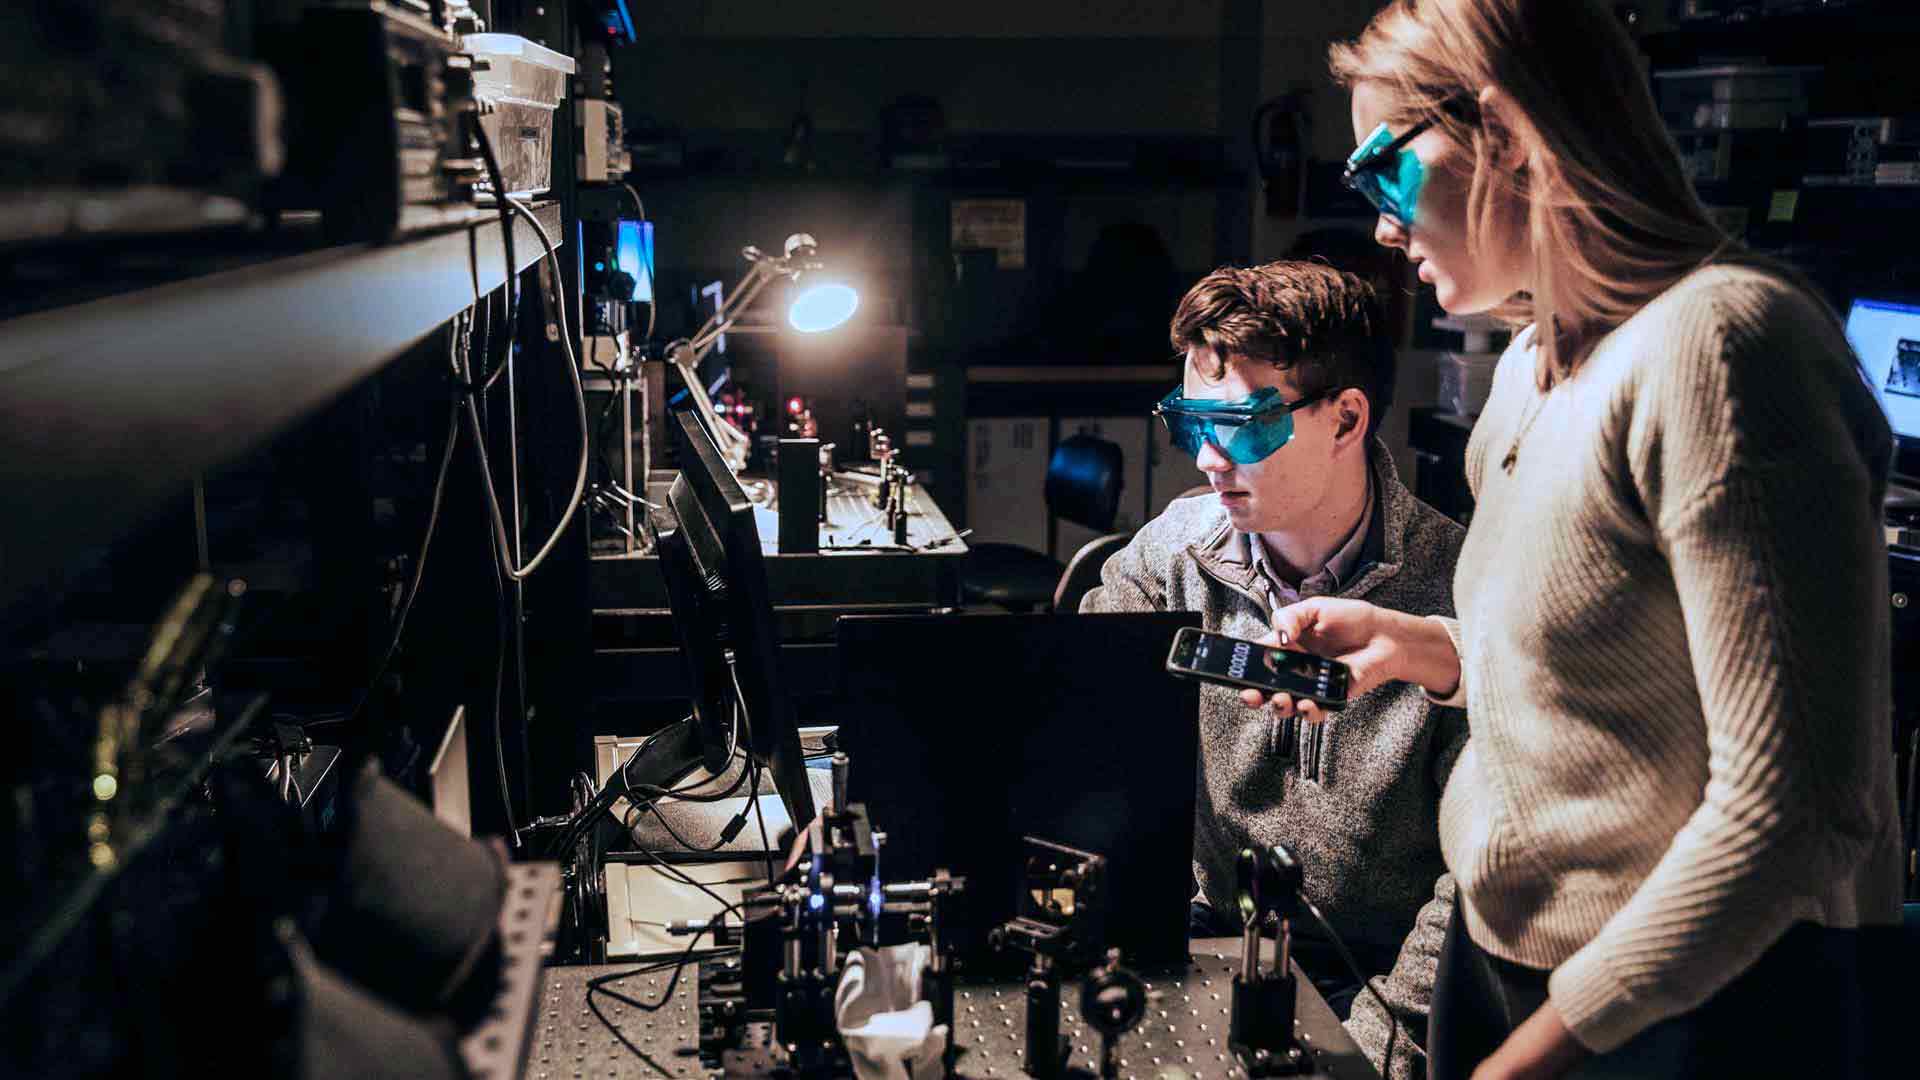 Two students work on a project involving lasers in a lab.